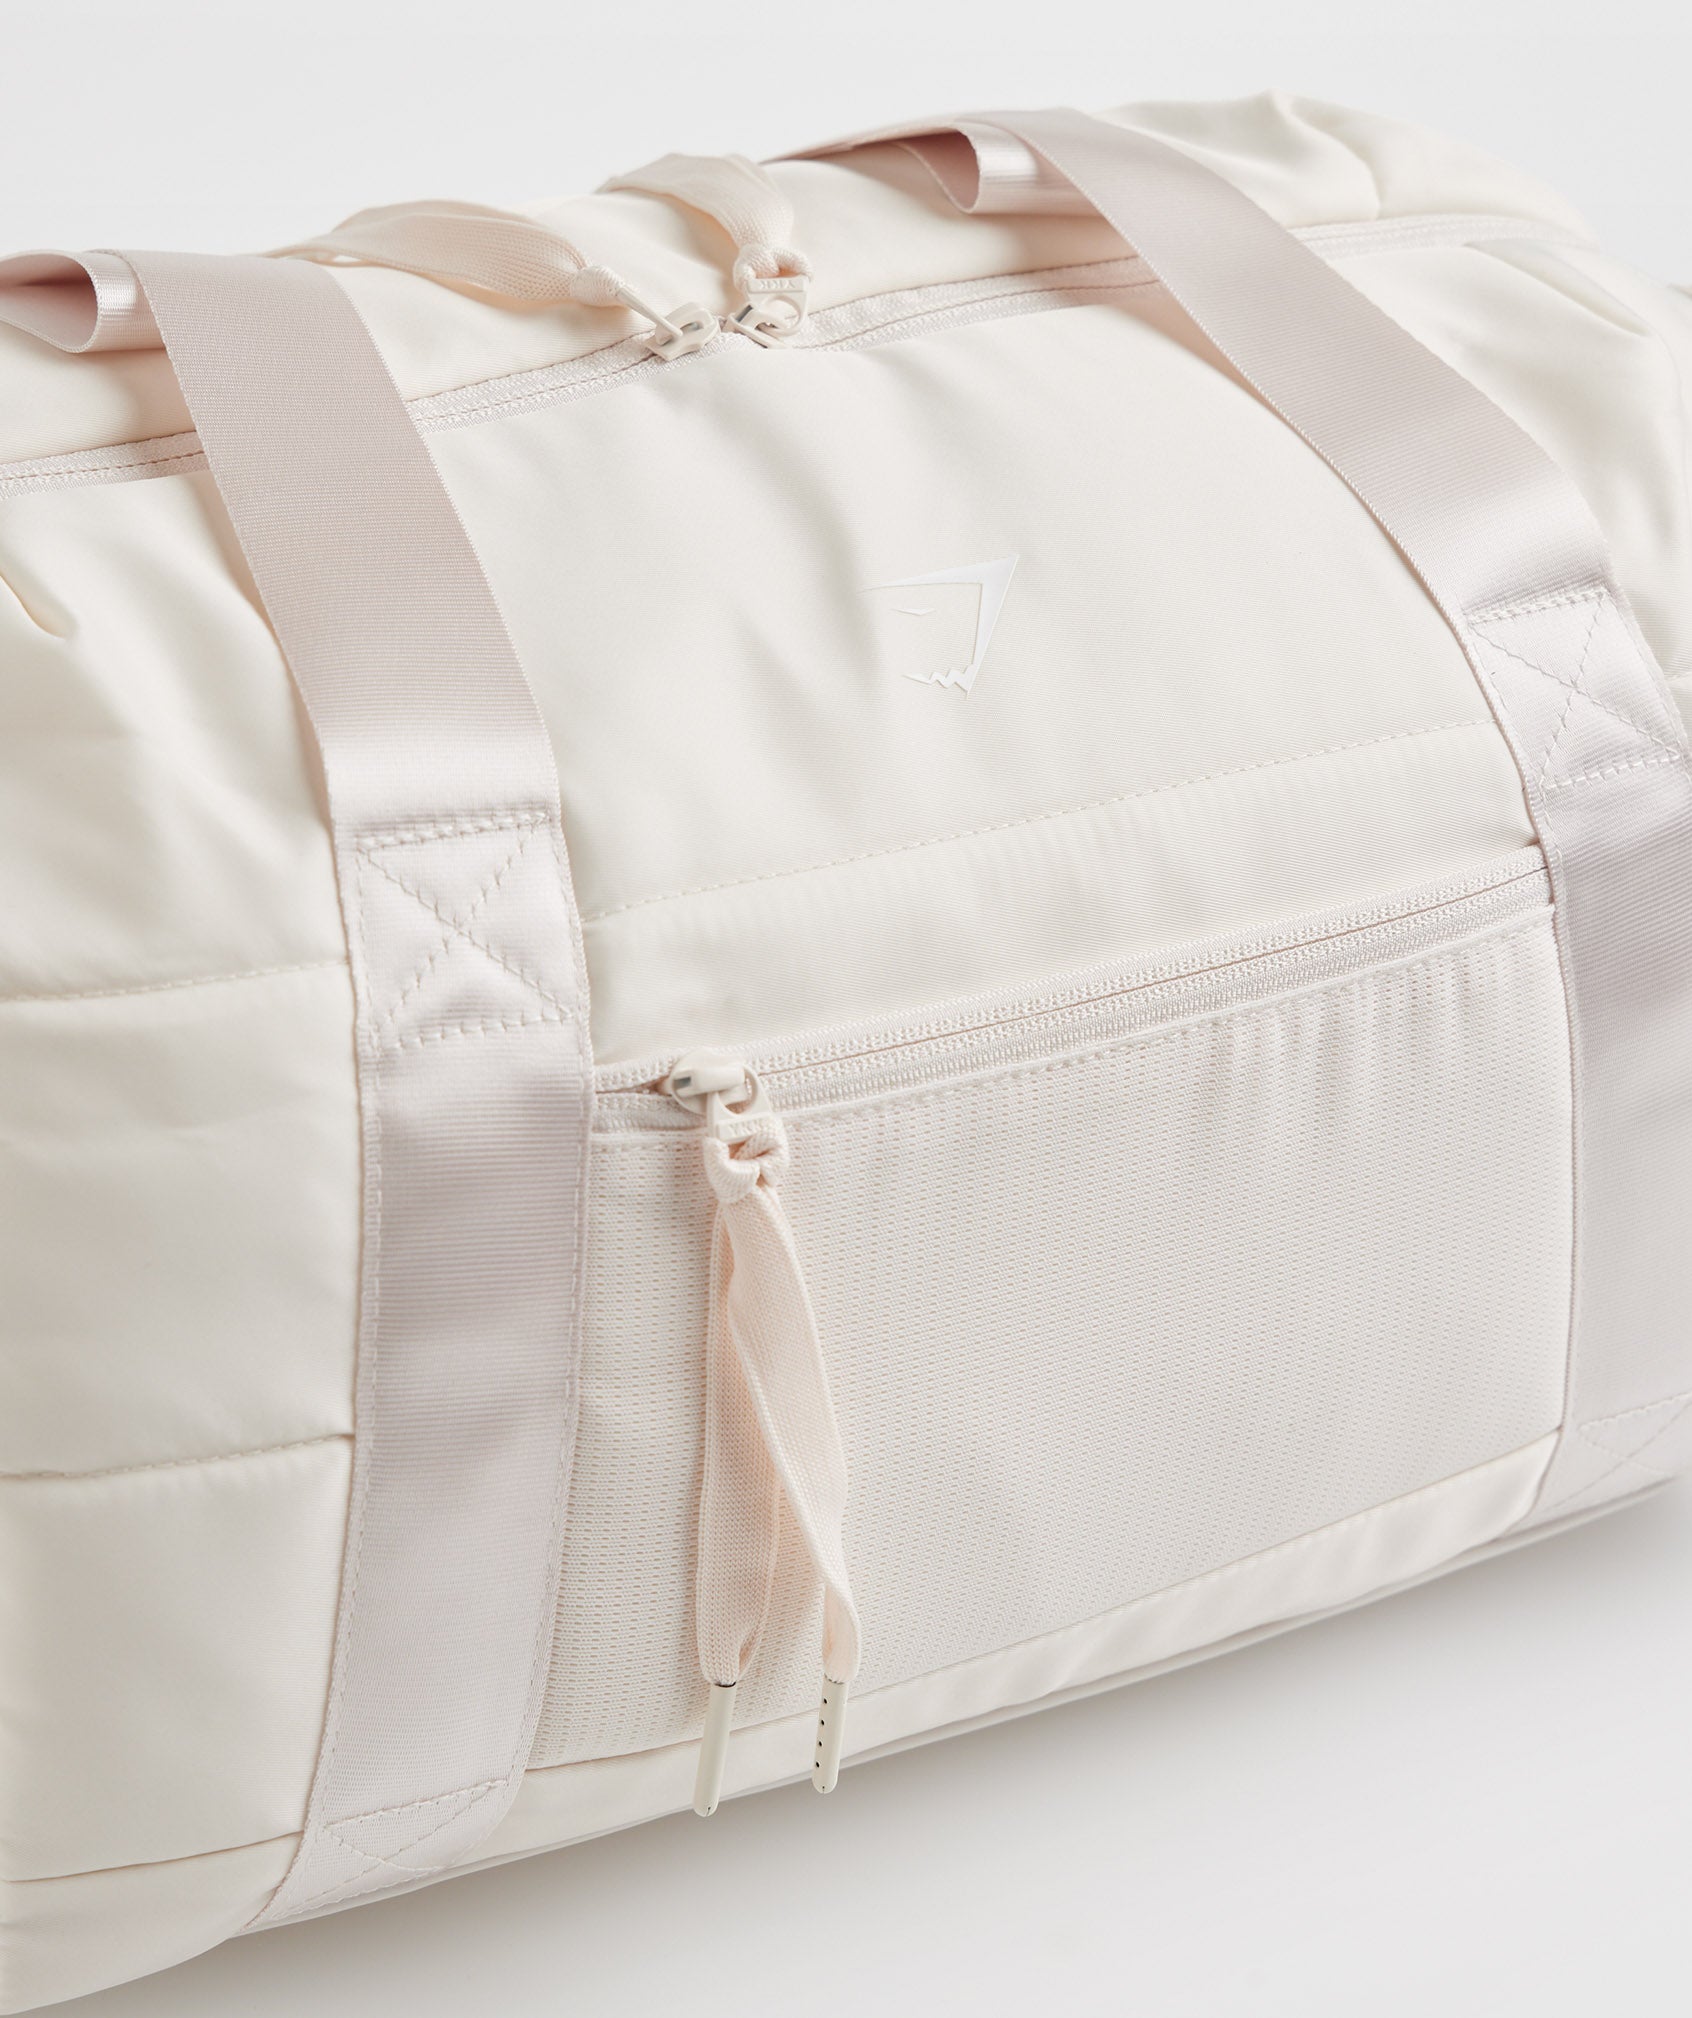 Studio Holdall in Coconut White - view 3